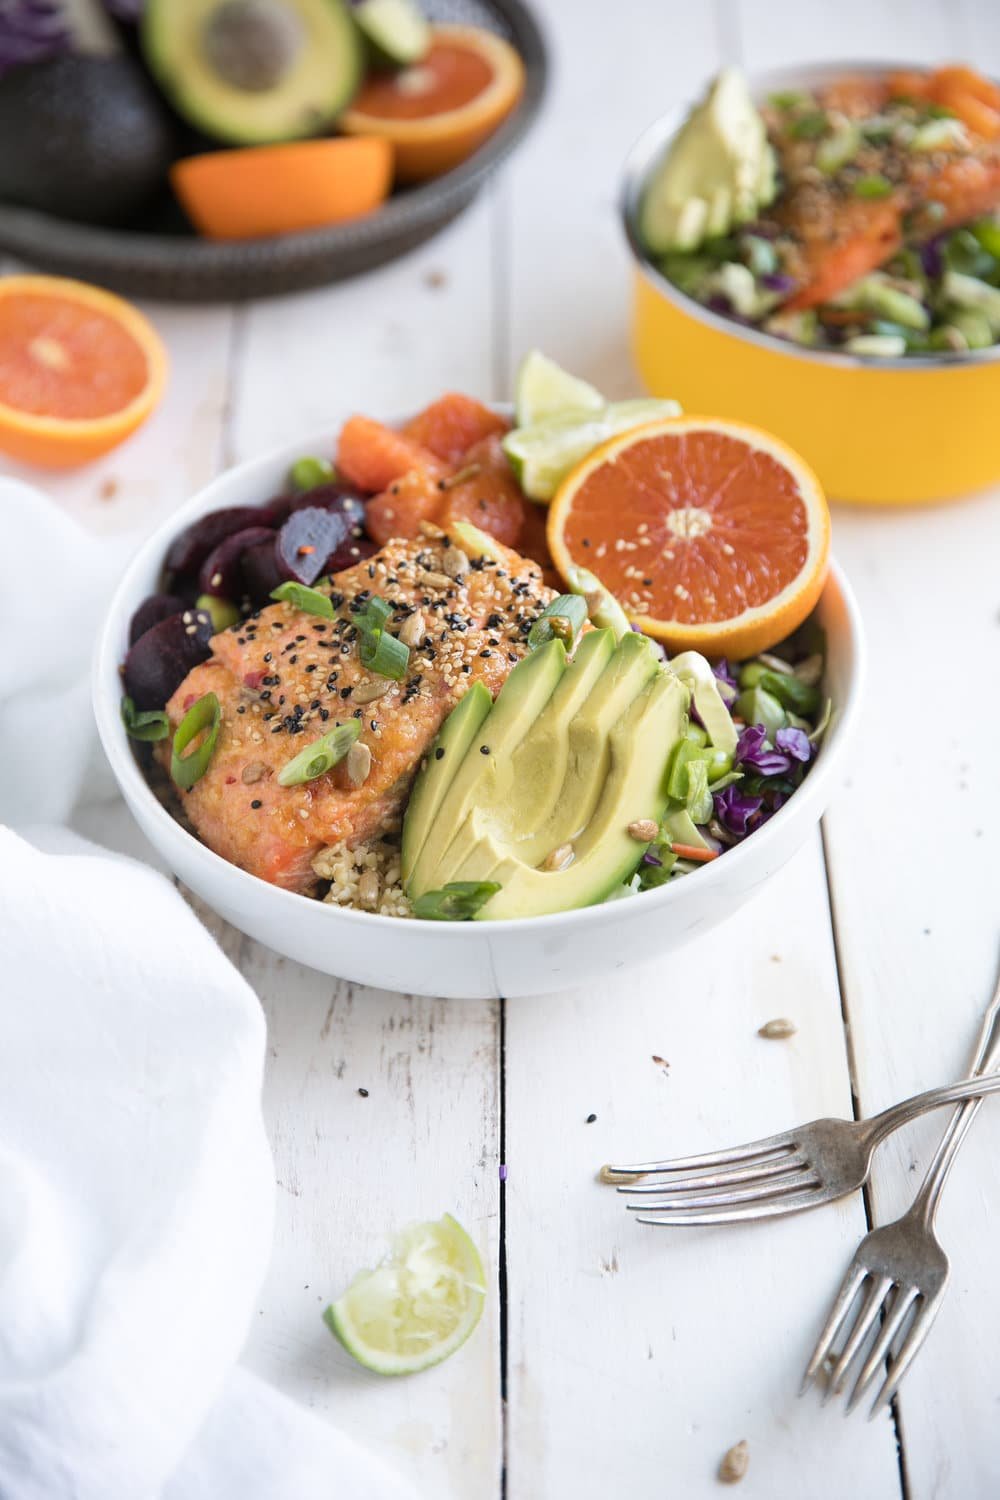 Super healthy foods like freekeh, beets, oranges, and avocado are just part of what make this nutritious 30 minute Sweet Chili Miso Salmon Salad a dinner win any night of the week!